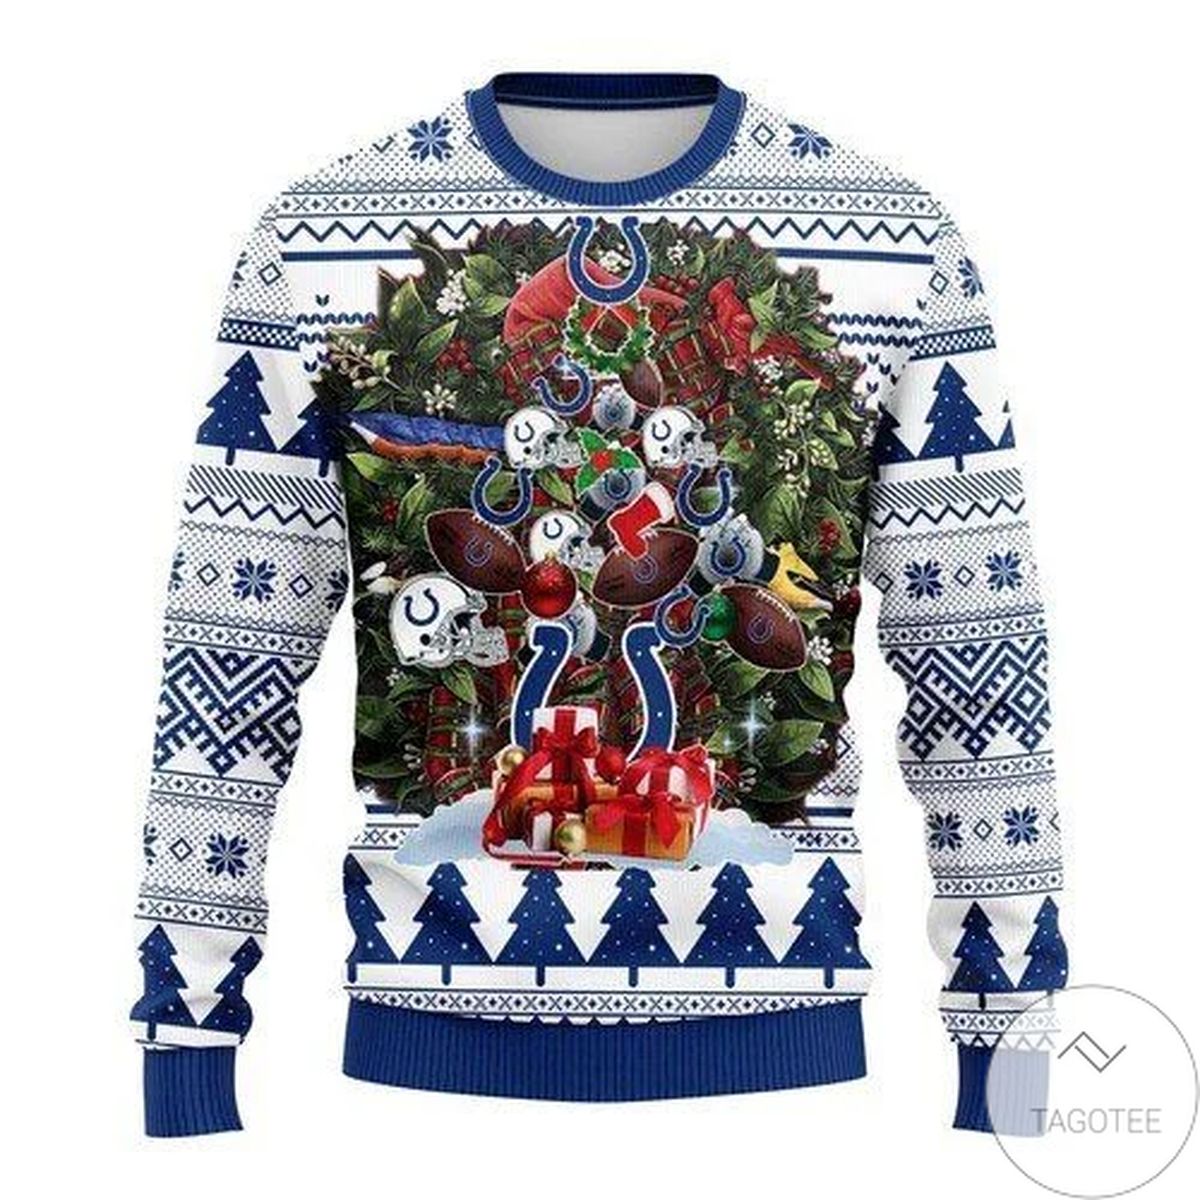 Indianapolis Colts Tree For Unisex Ugly Christmas Sweater